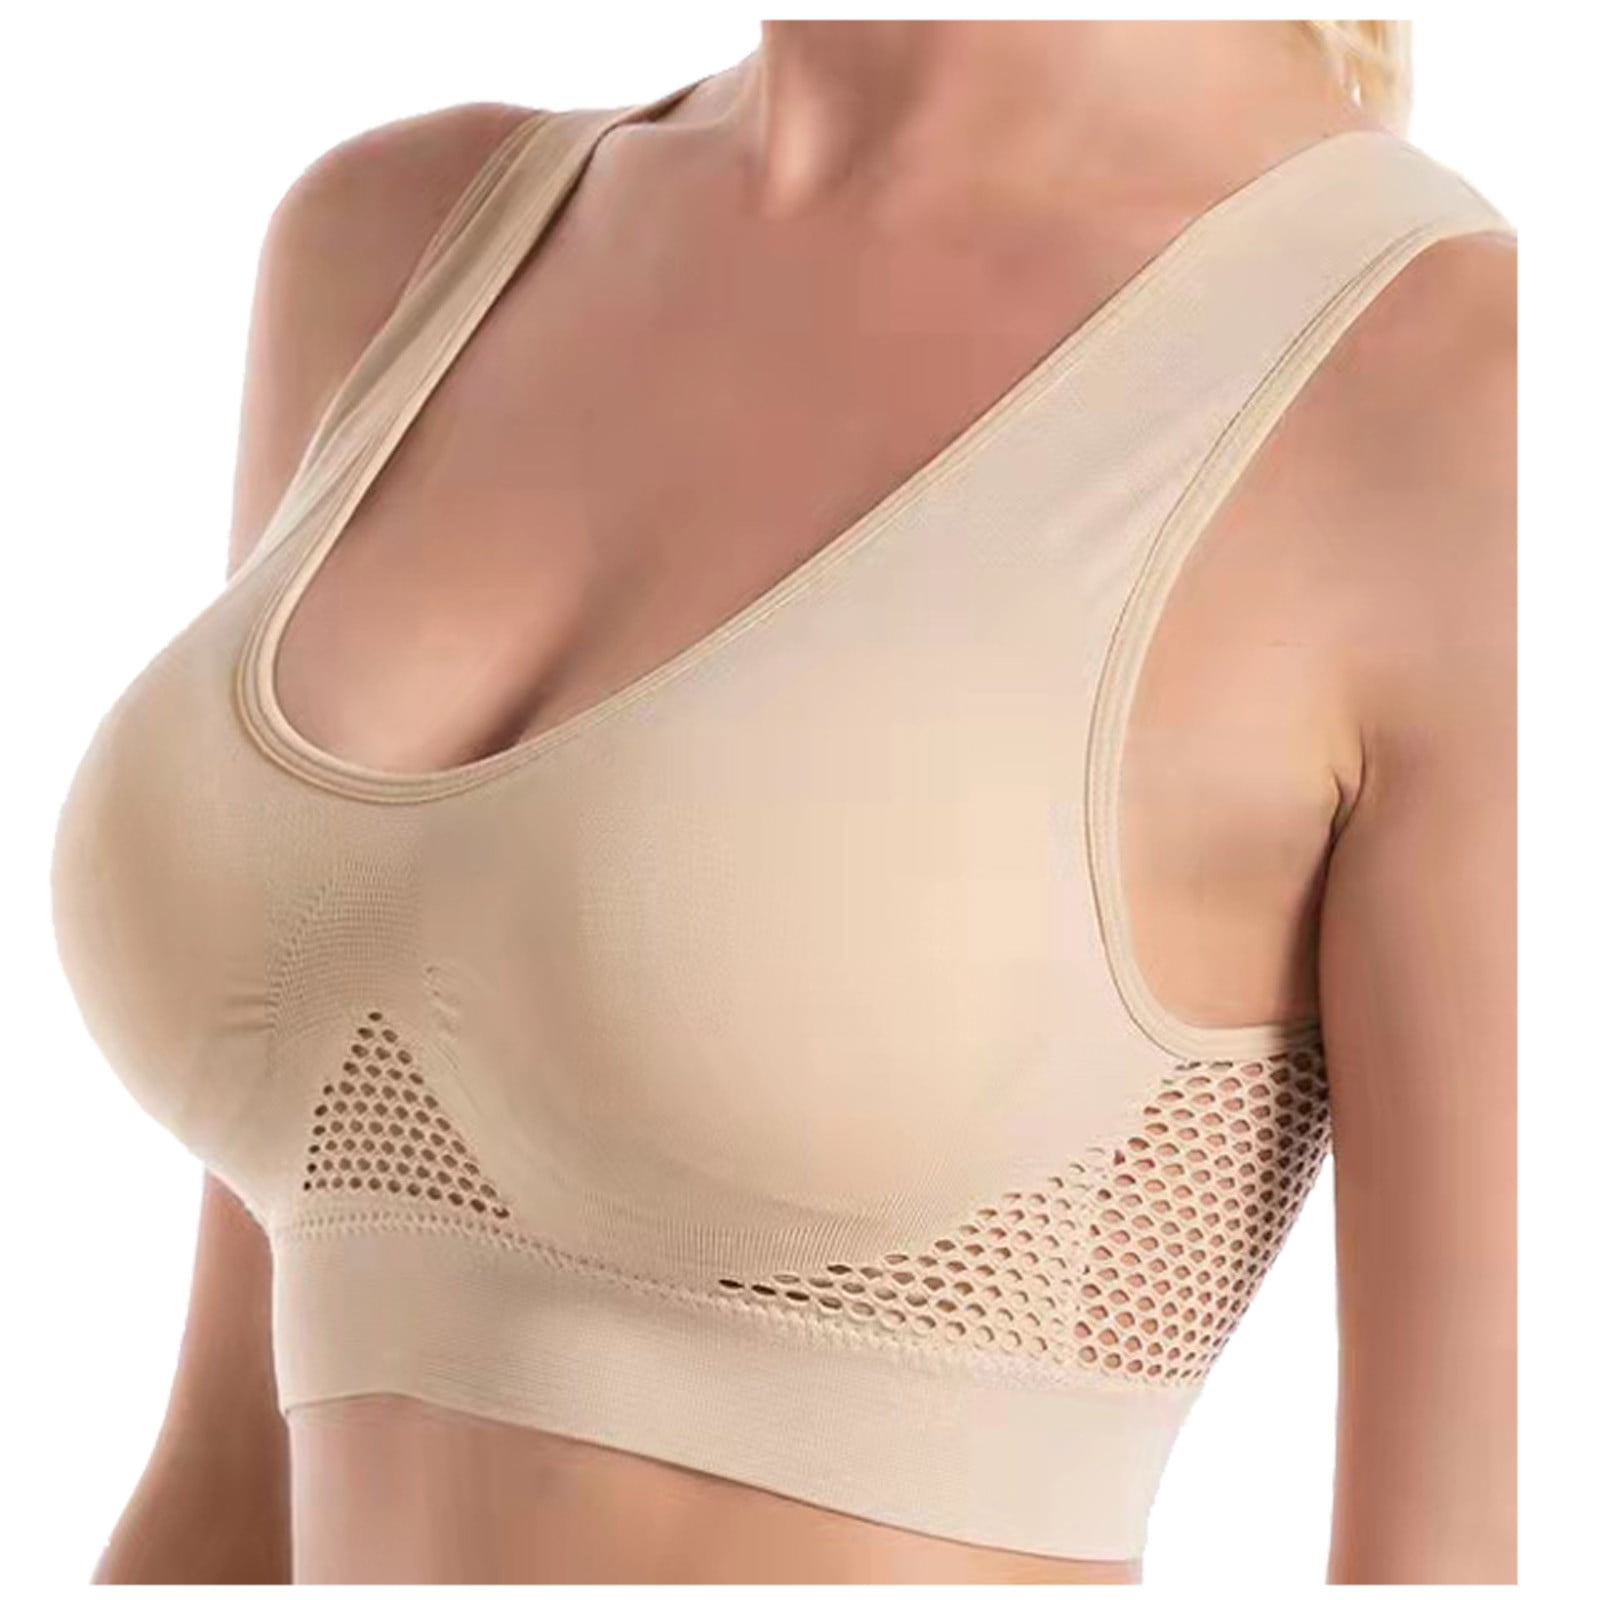 Fesfesfes 3-Pack Sports Bras for Women Seamless Wirefree Support